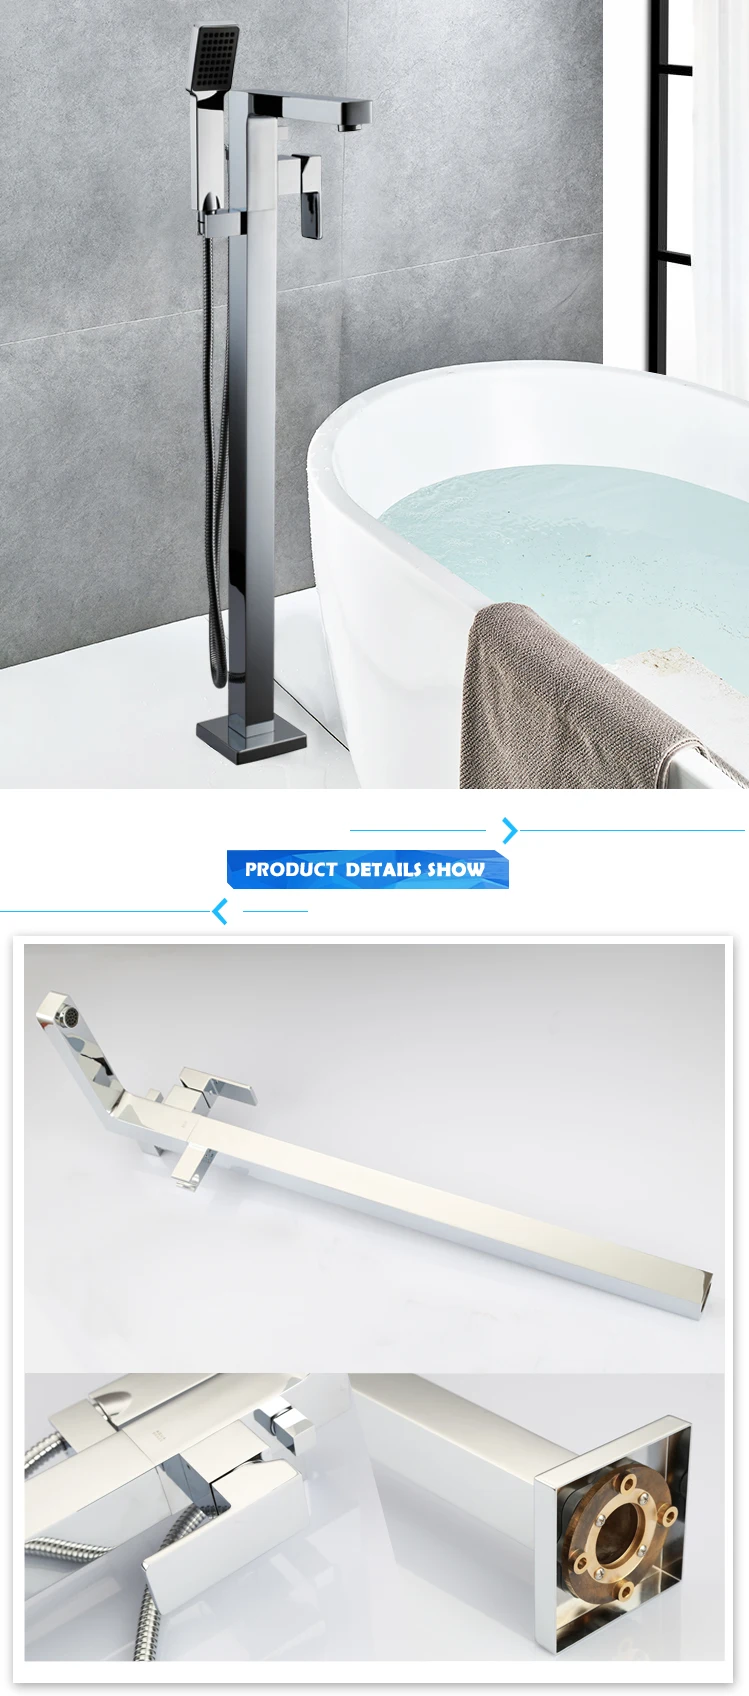 High quality standing faucet for bathtub, bathtub faucet with good price